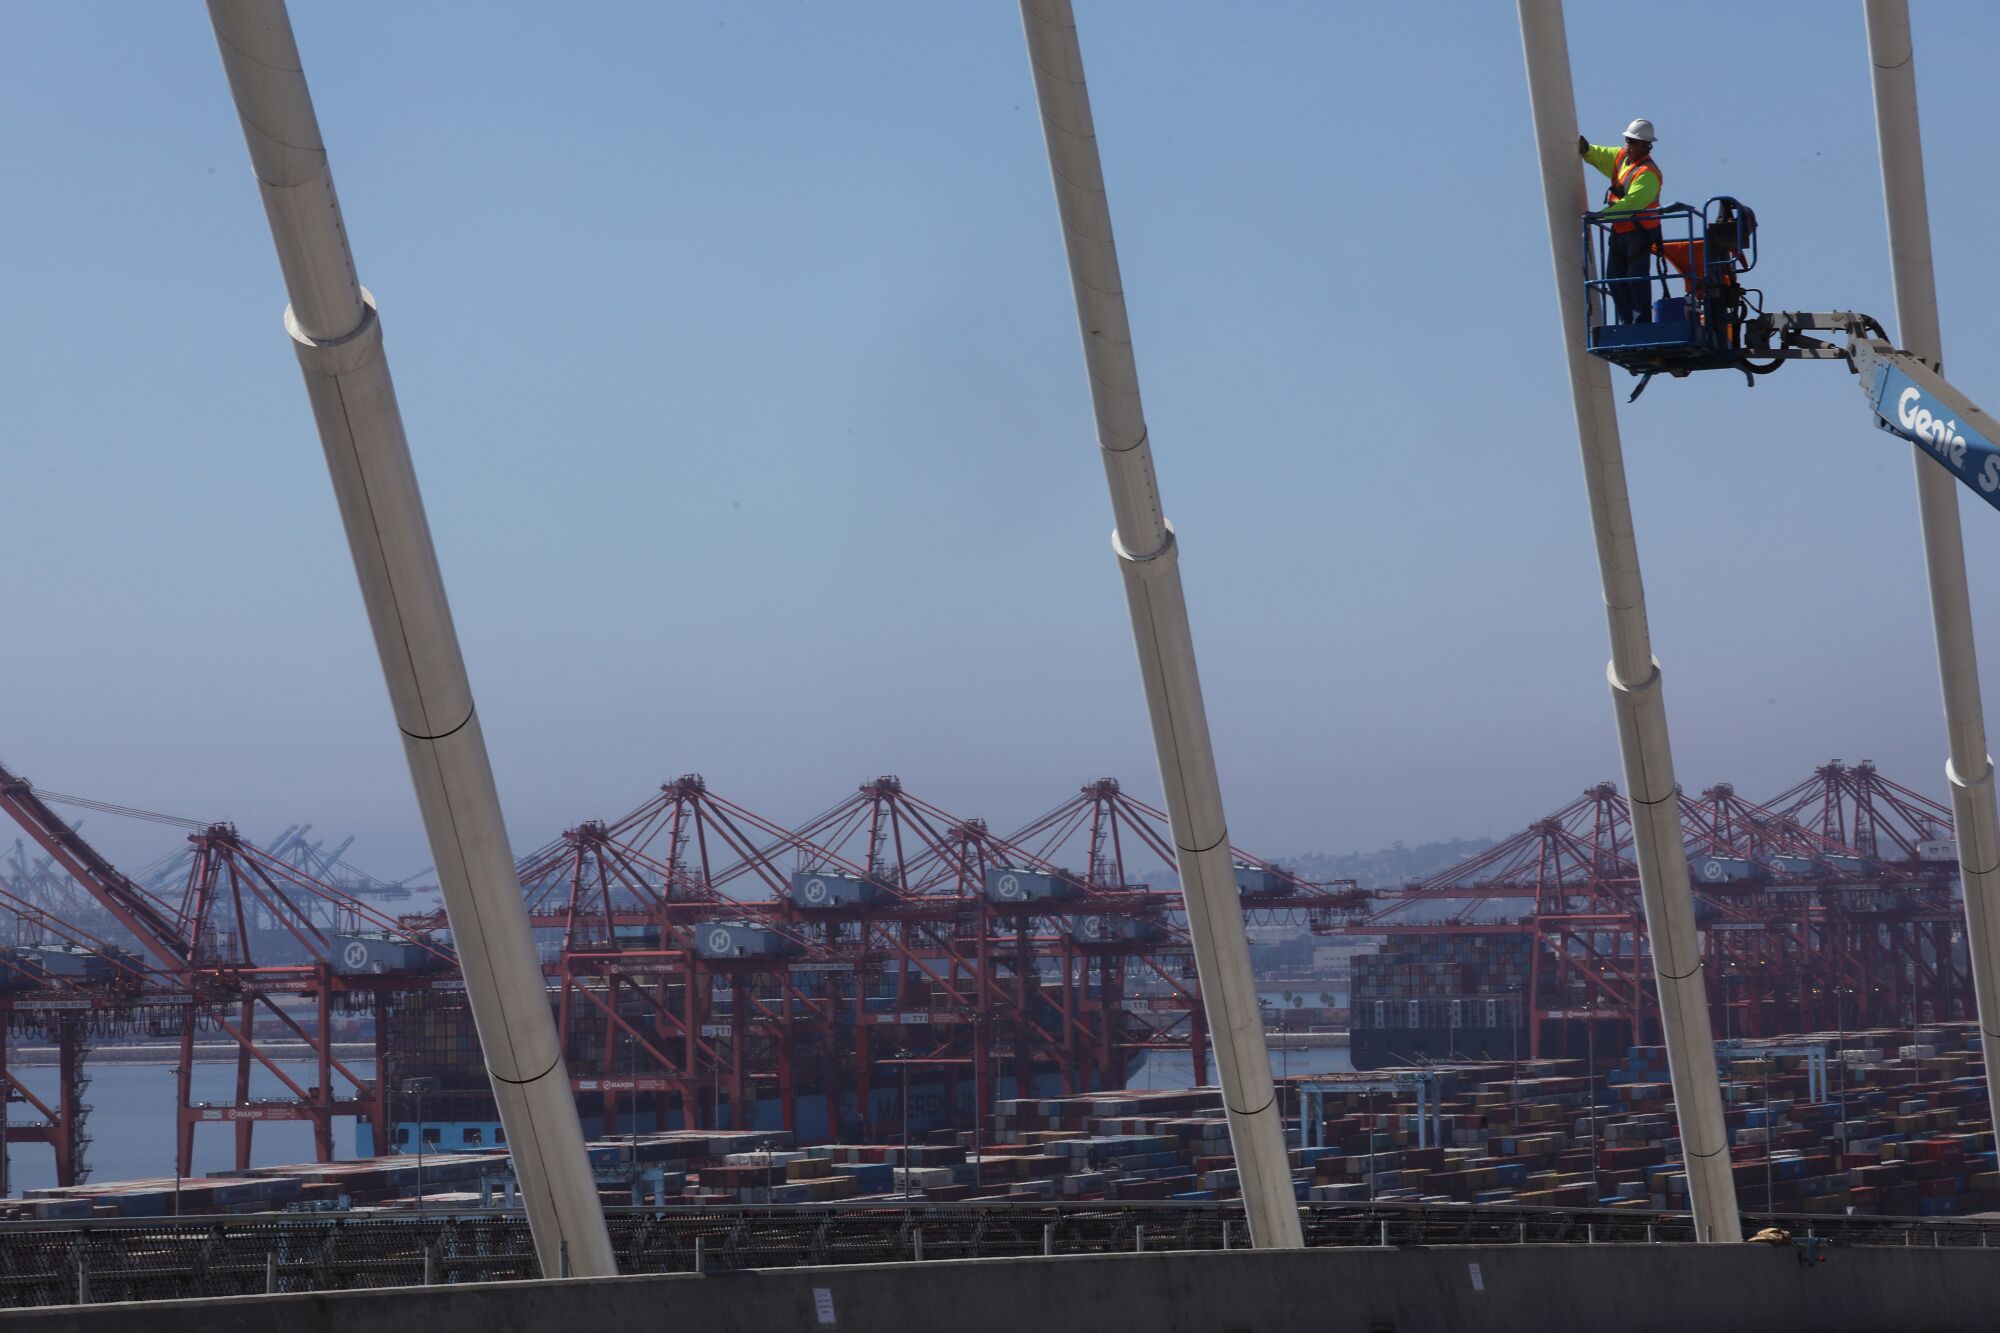 A worker on a lift works on bridge cables